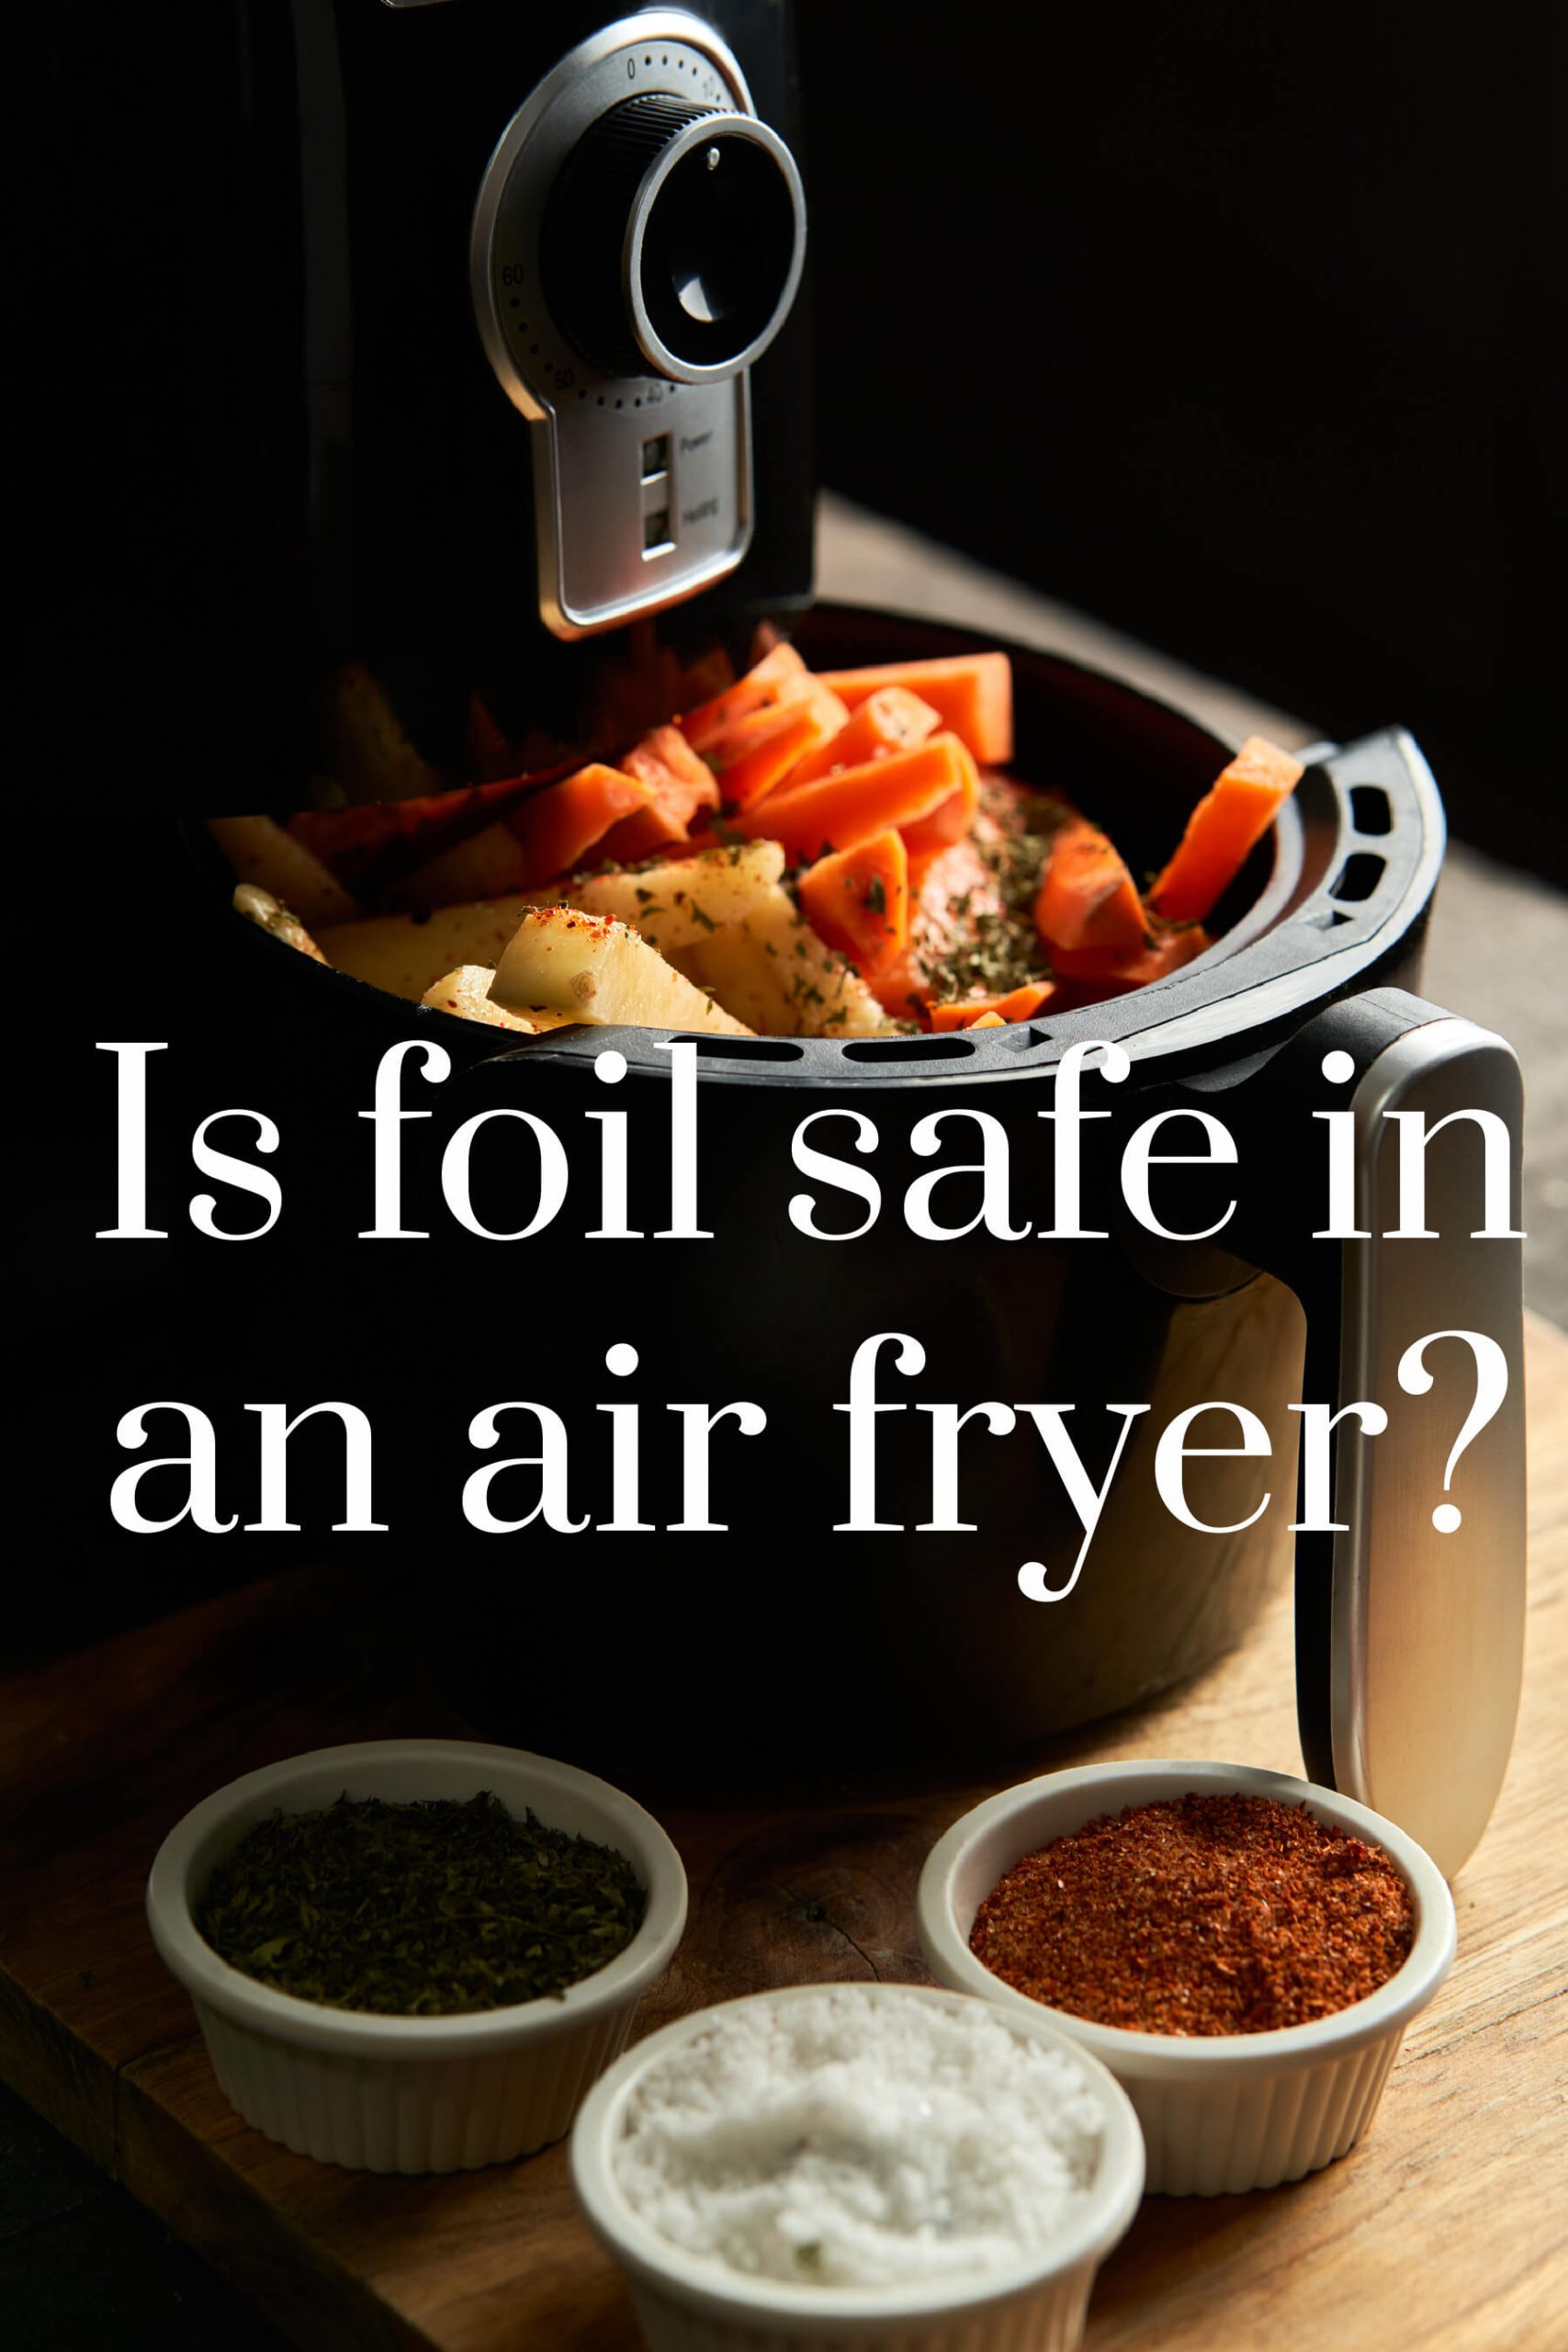 Read This Before Putting Parchment In An Air Fryer